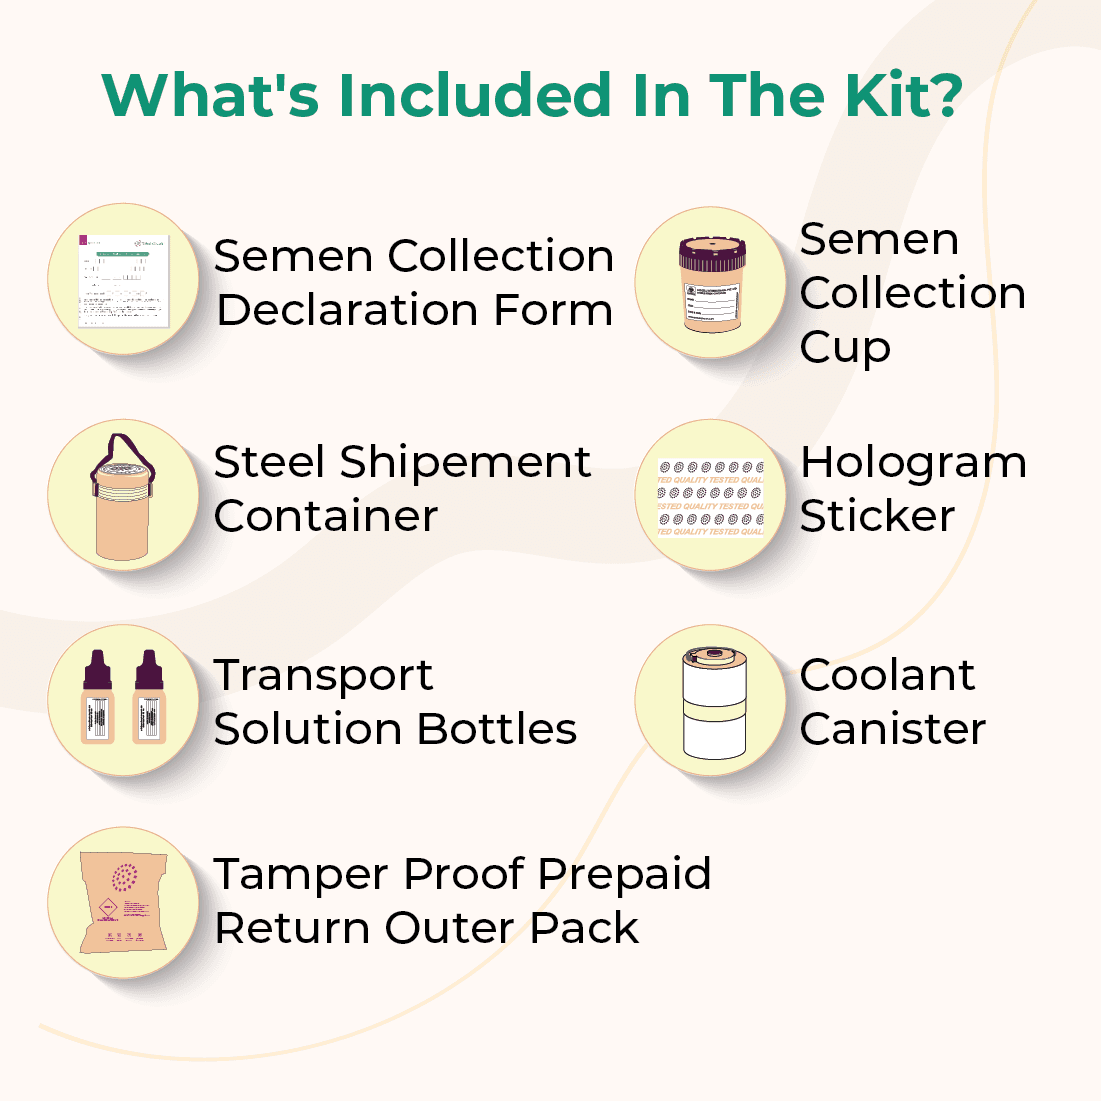 What's Included In The Spermvault Kit
